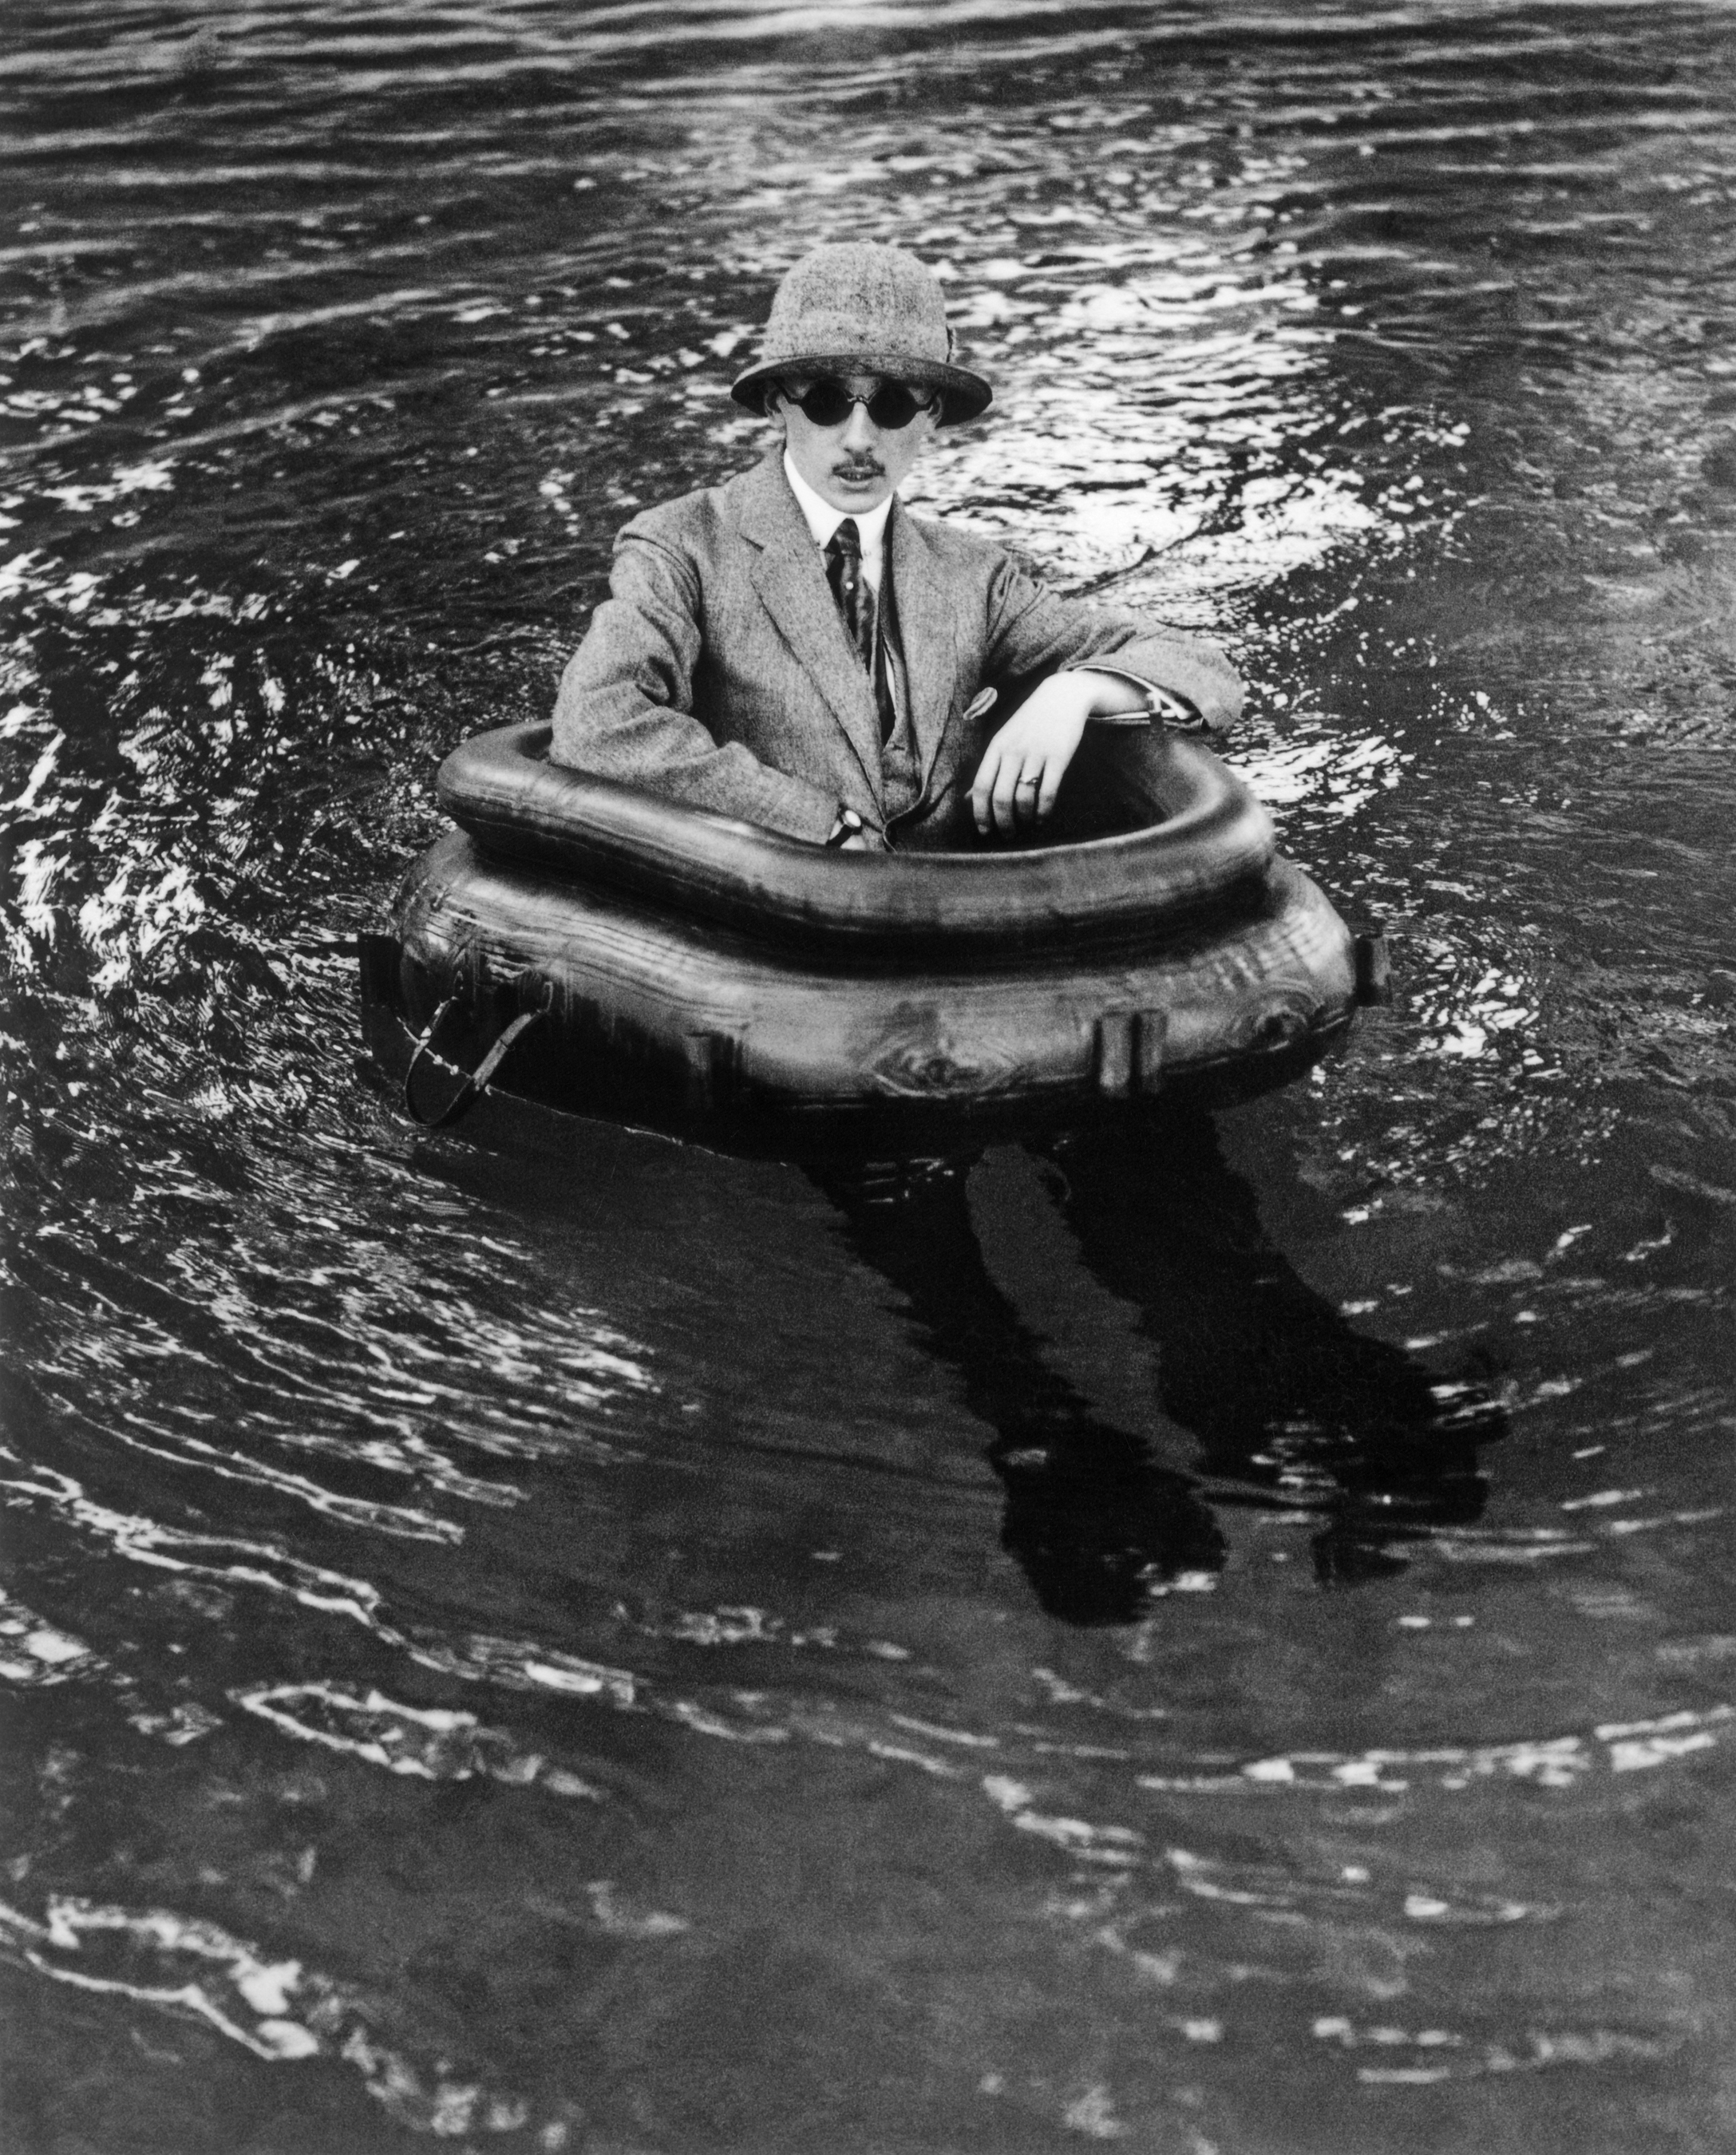 The state-of-the-art gentleman stays high and dry: Lartigue's brother Maurice, nicknamed Zissou, in a high-tech flotation device with rubber boots.